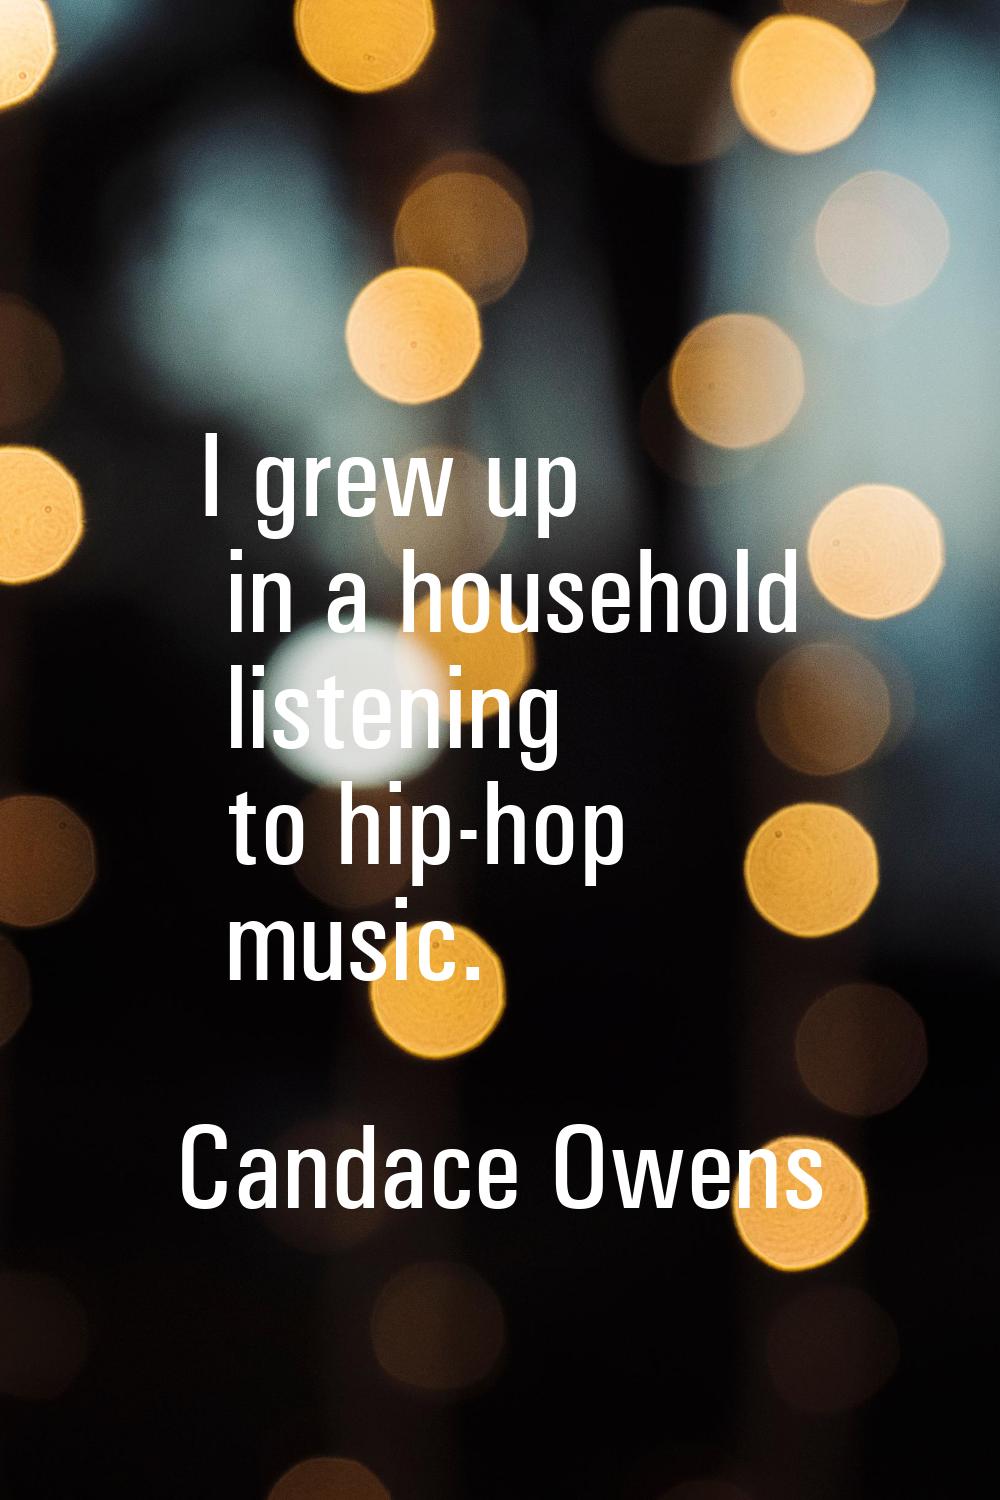 I grew up in a household listening to hip-hop music.